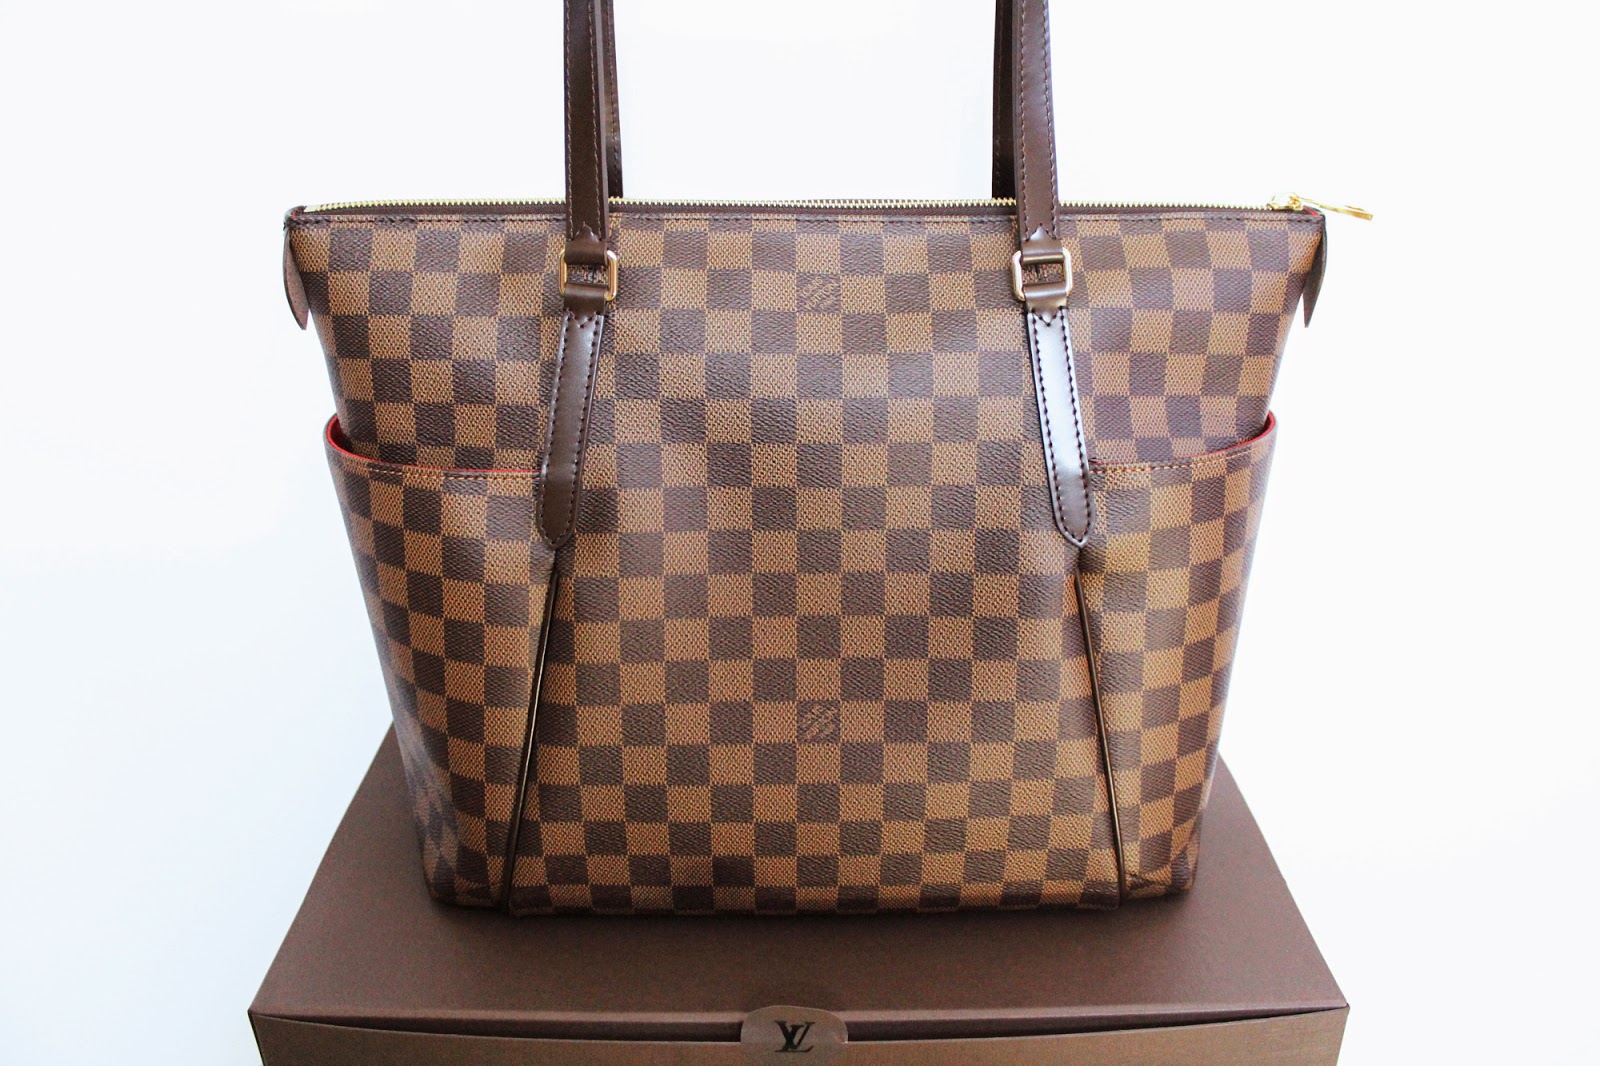 The Style Minded: Louis Vuitton Totally MM Damier Ebene - First Impressions + Pictures